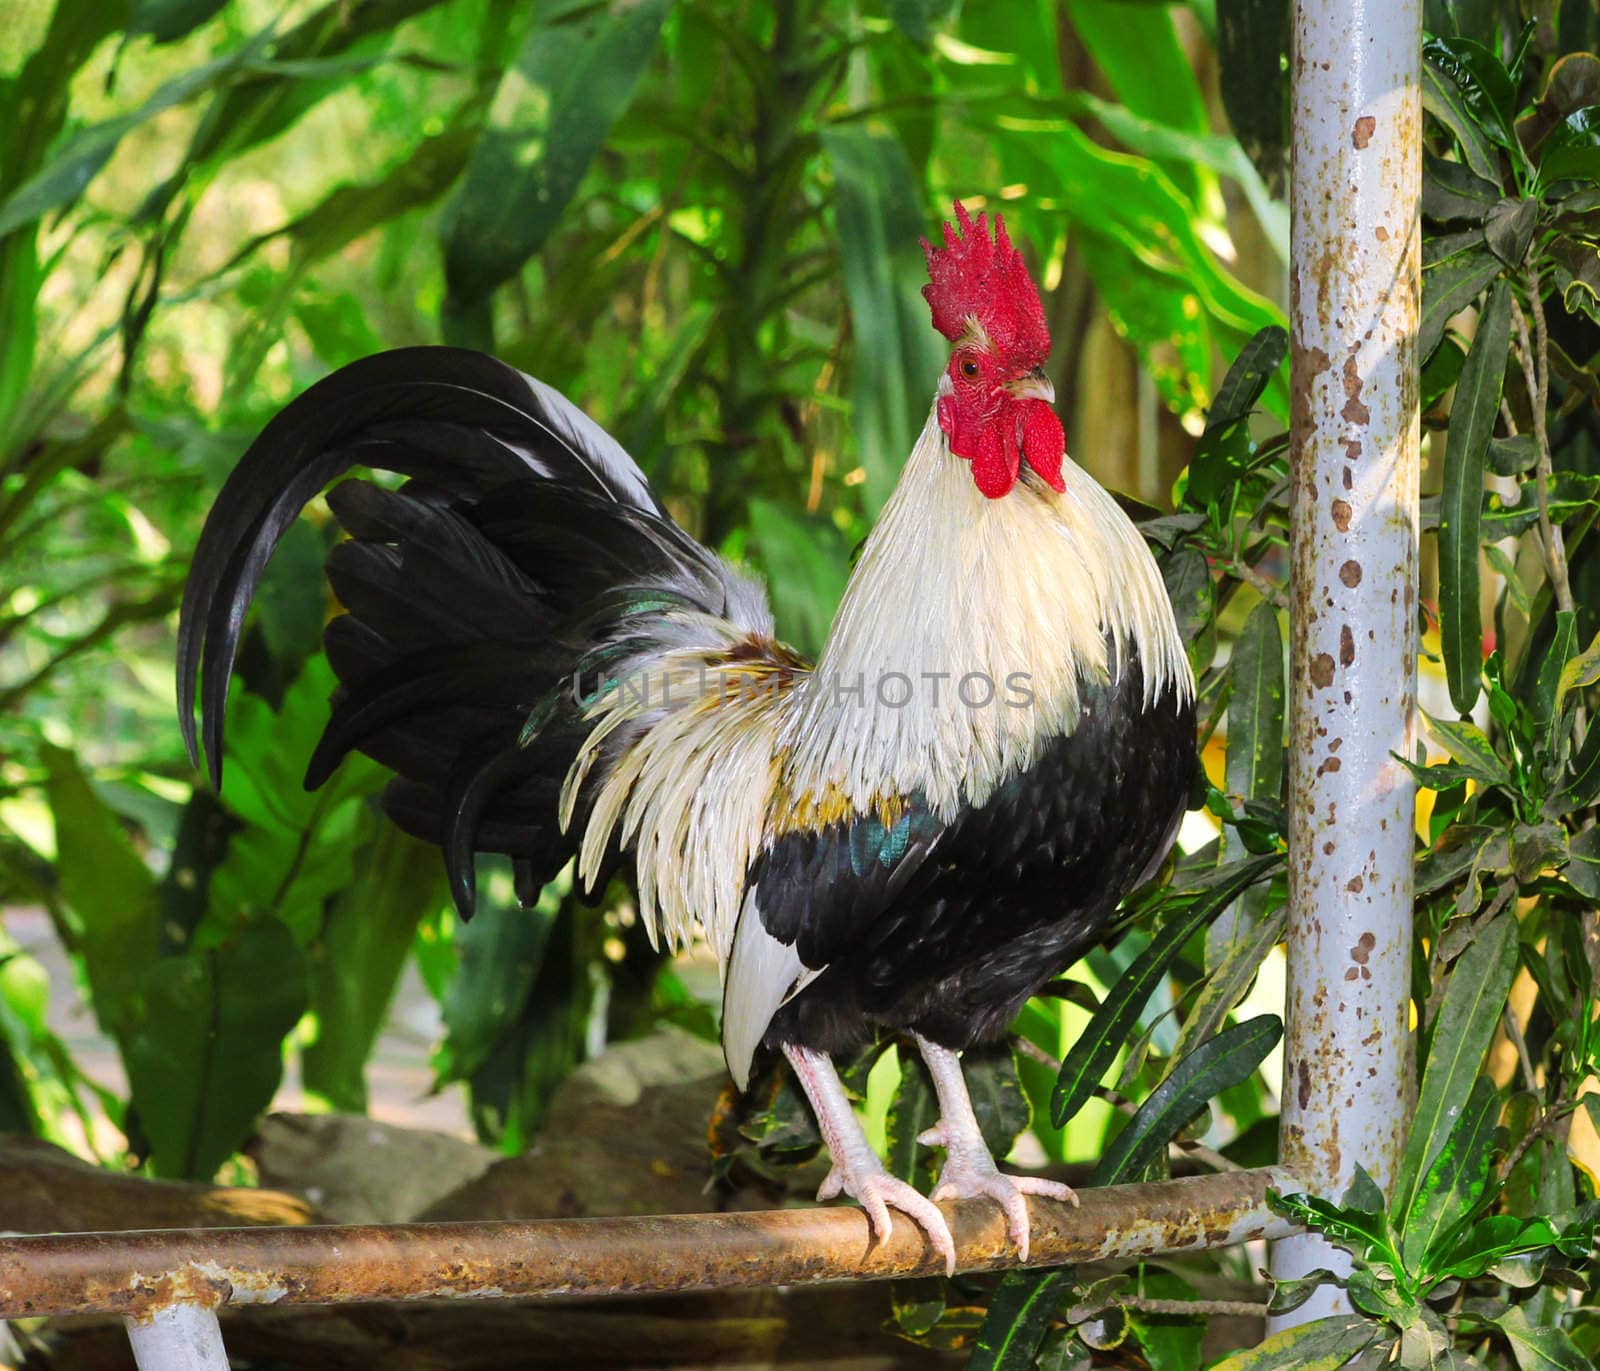 Roosters live in temple Thailand. A small hut